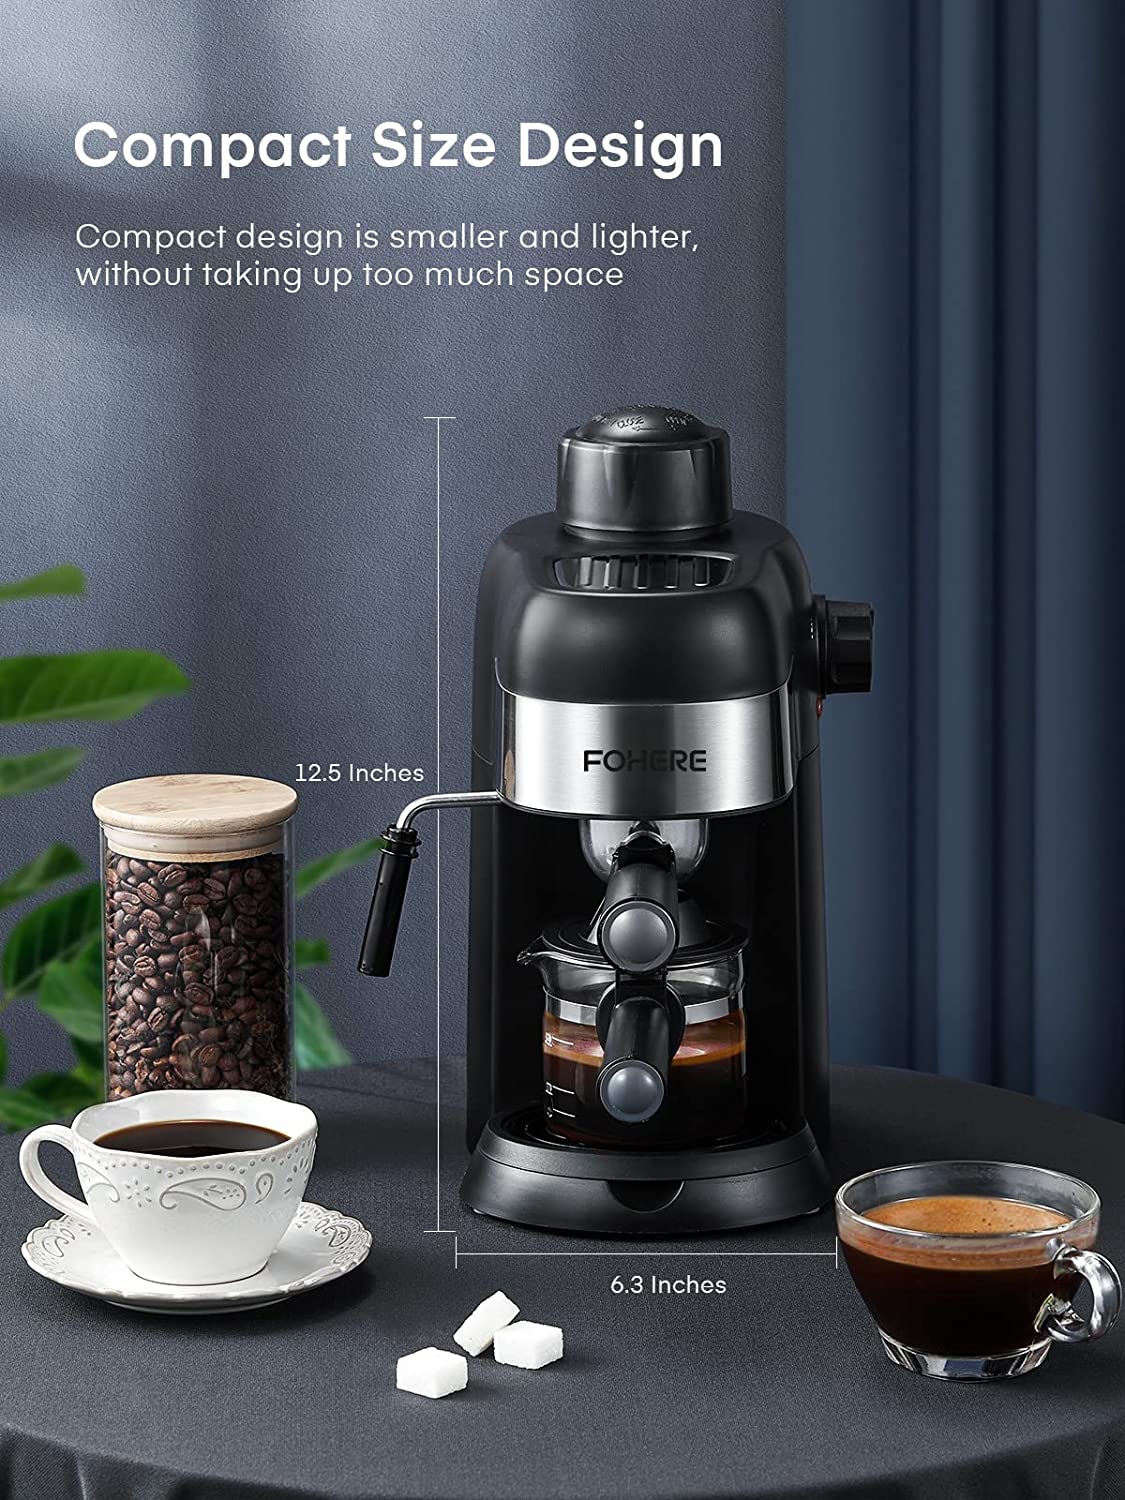 compact size design, FOHERE Espresso Machine, 3.5 Bar 4 Cup Steam Espresso Machine, Espresso and Cappuccino Maker with Milk Frother and Carafe, Professional Compact Coffee Machine for Espresso, Cappuccino, Latte and Mocha